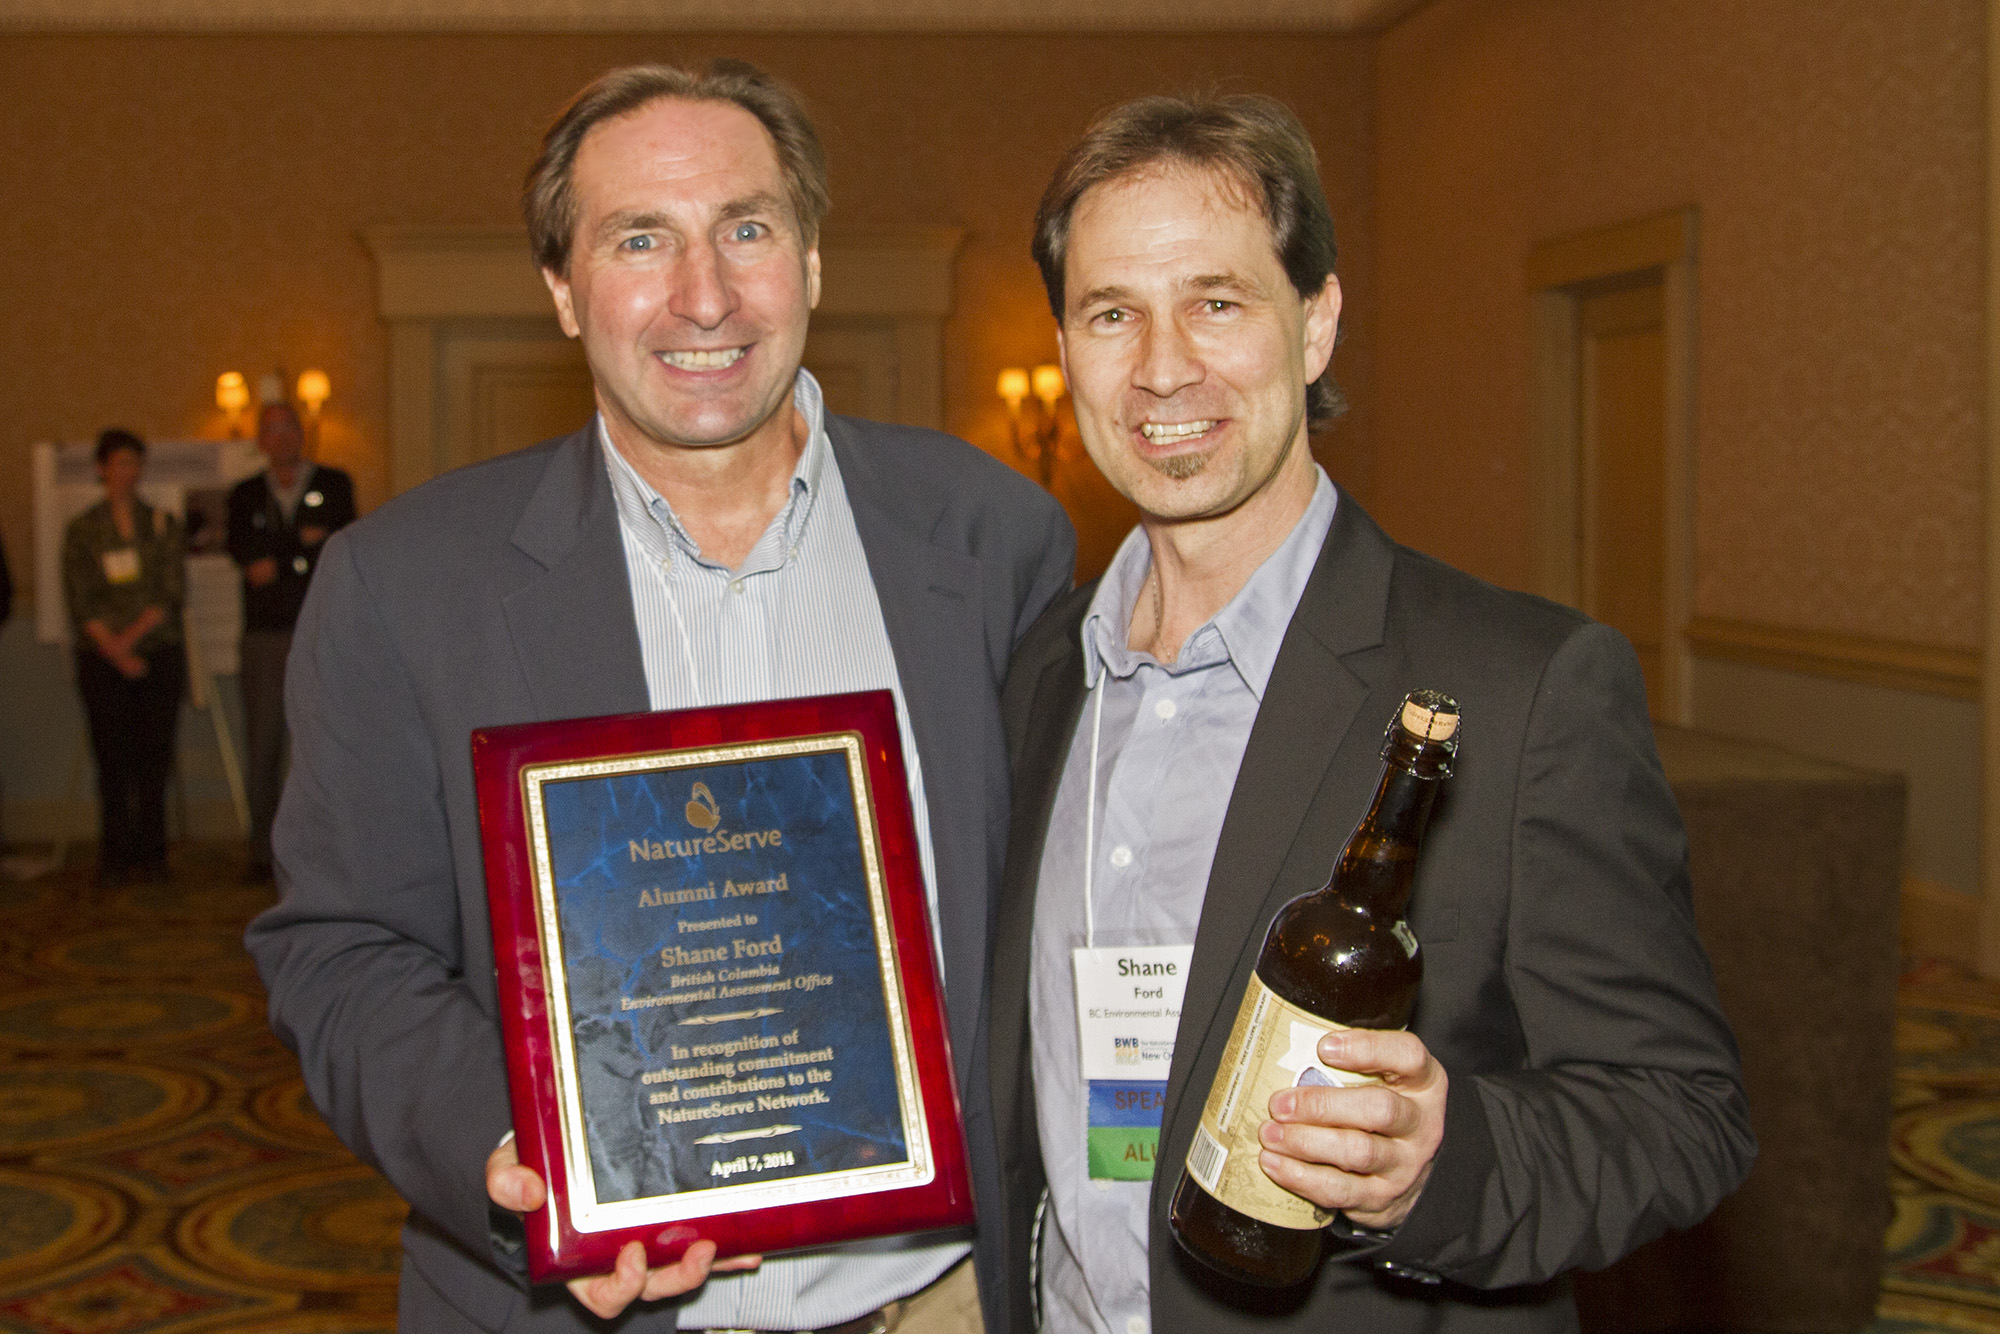 Shane Ford (right) receives the 2014 NatureServe Alumni Award from Don Kent, NatureServe's director of network relations.